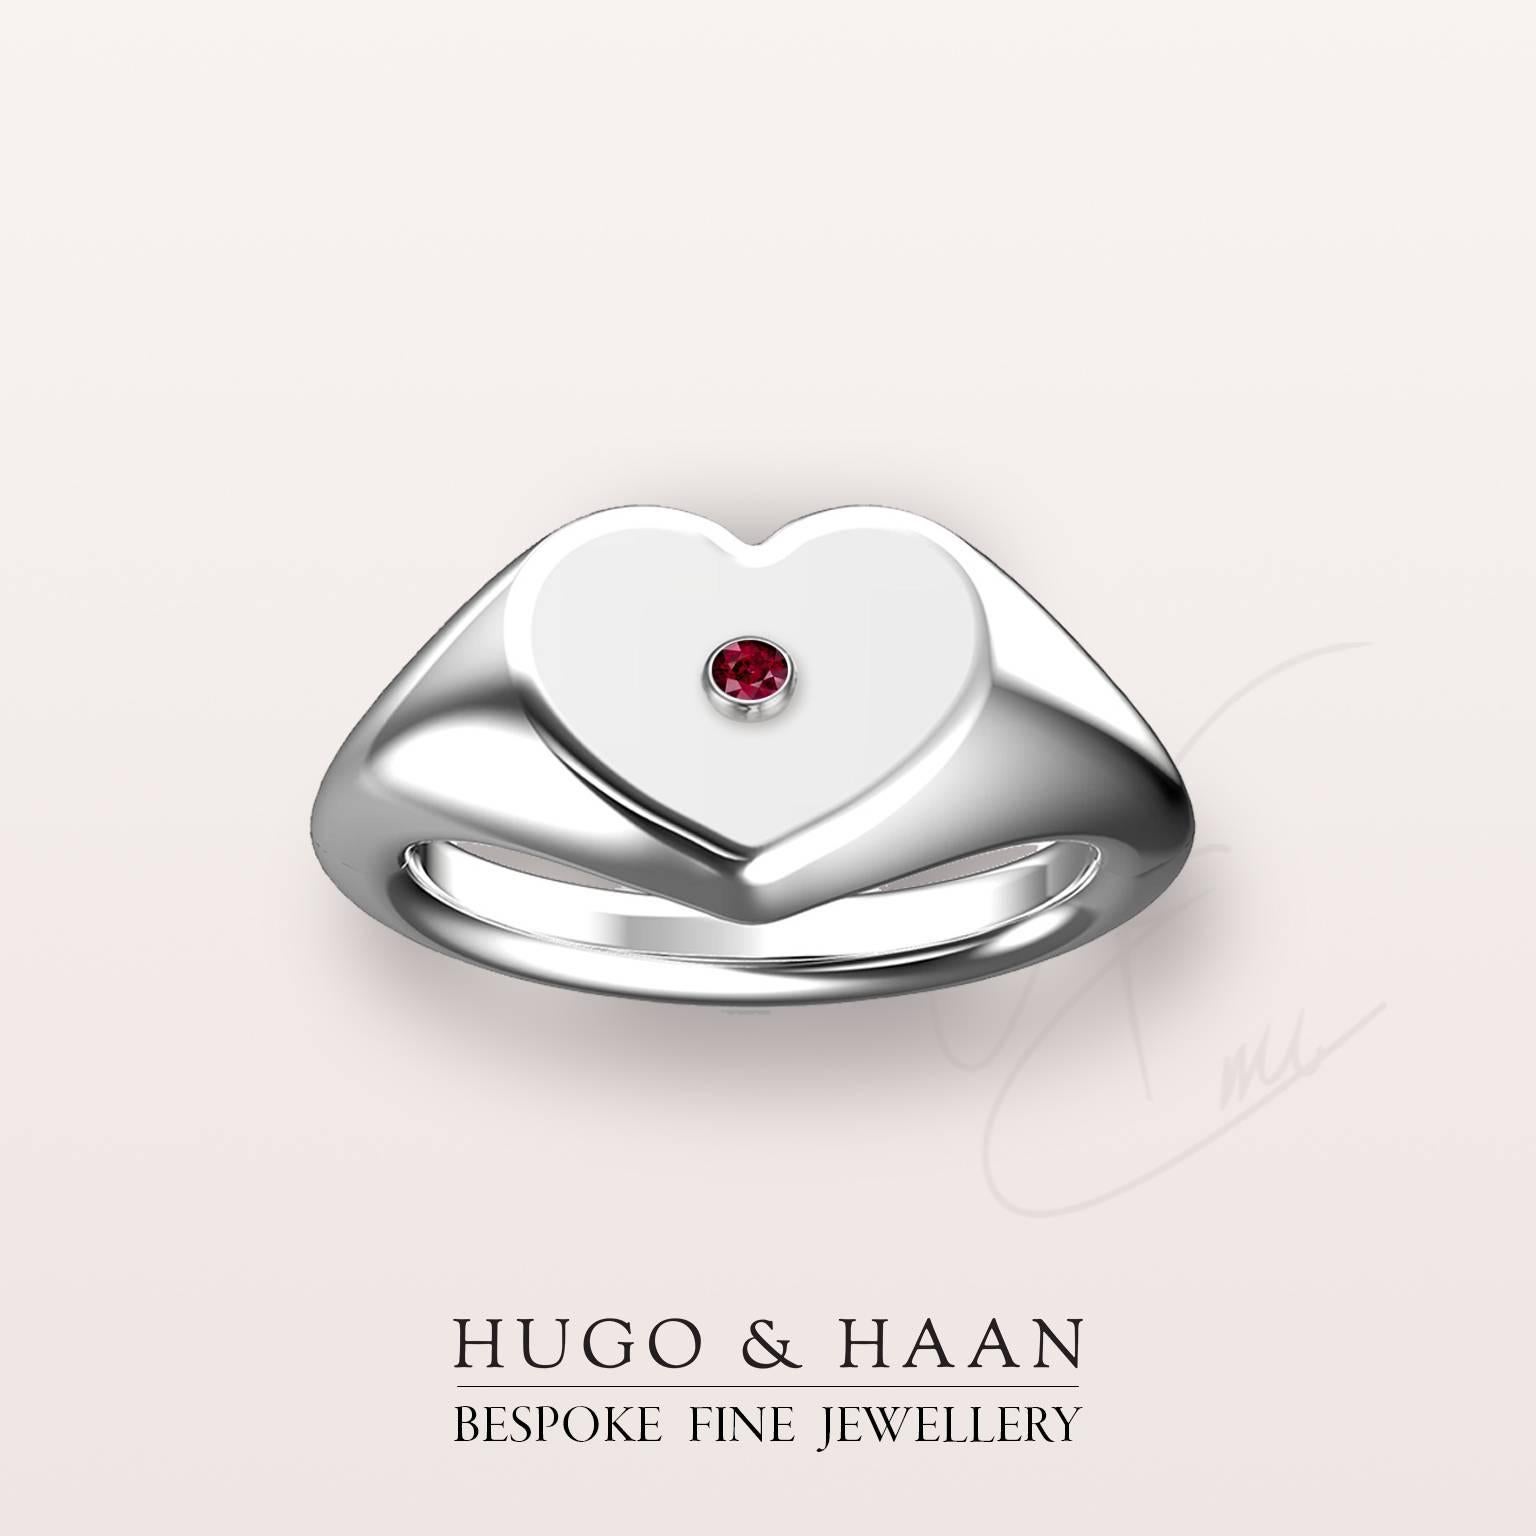 Details:

Material : 18k White Gold
Principle Gemstone : Ruby
Other Gemstone : -
Customizable: Yes

Options to customize: 

Metals available : Platinum, 18kt Yellow Gold or 18kt White Gold
Gemstones Available : Most semi-precious and precious